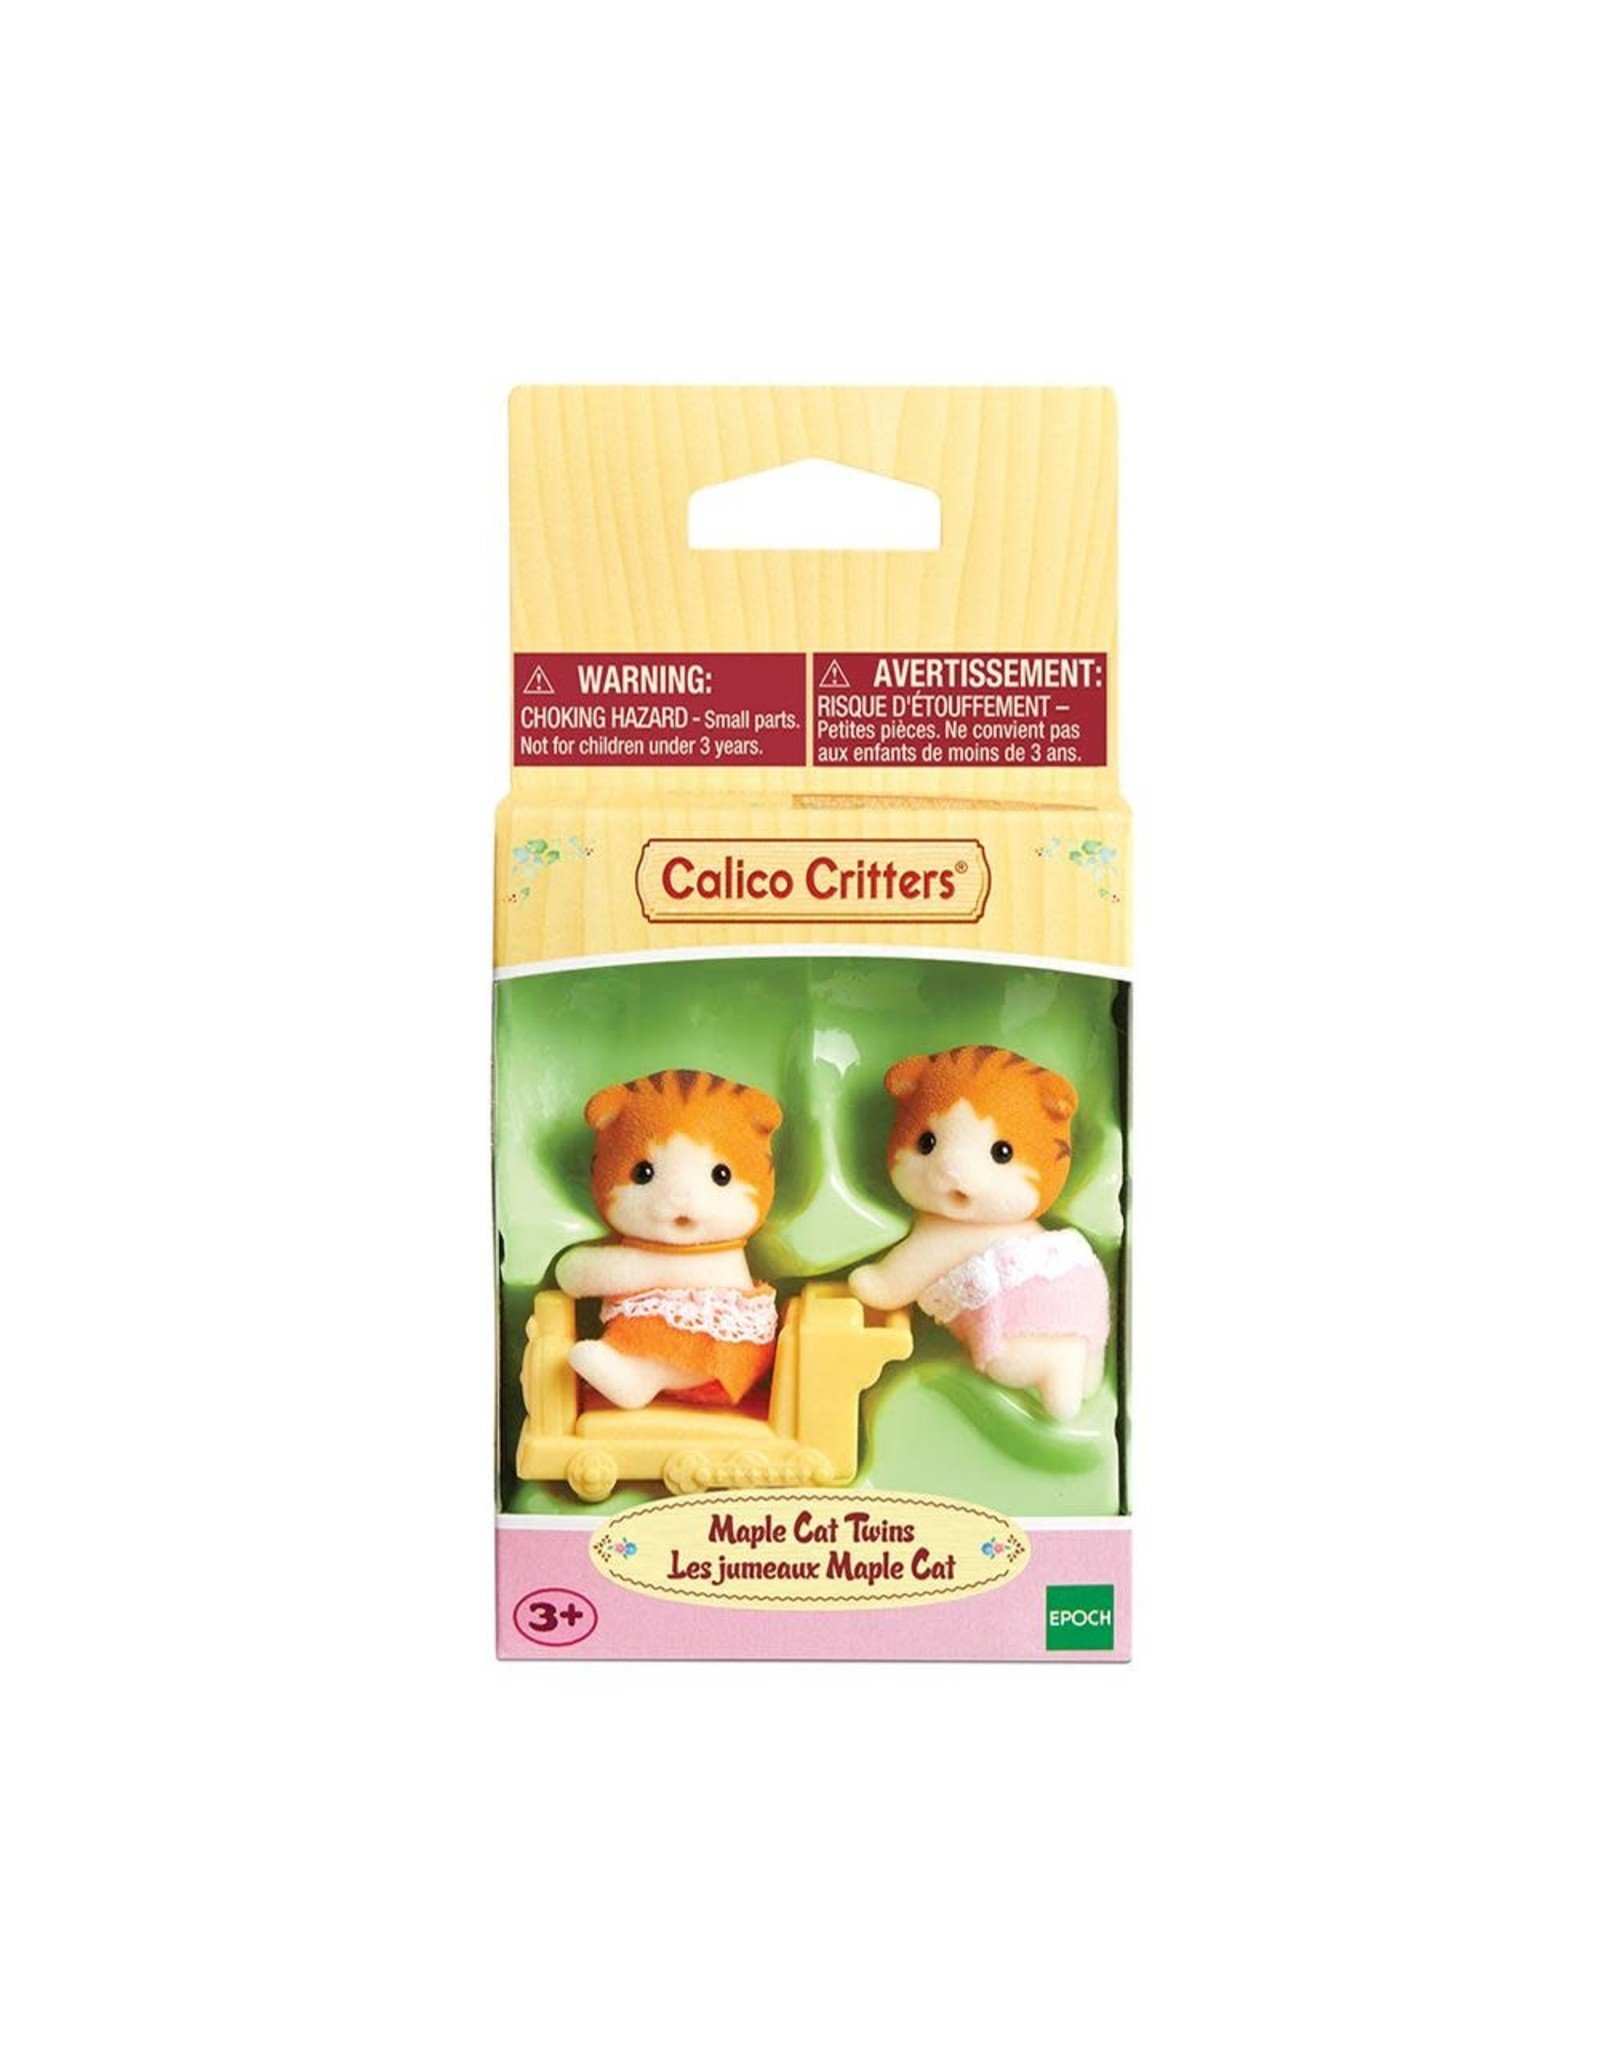 Calico Critters Calico Critters Maple Cat Twins